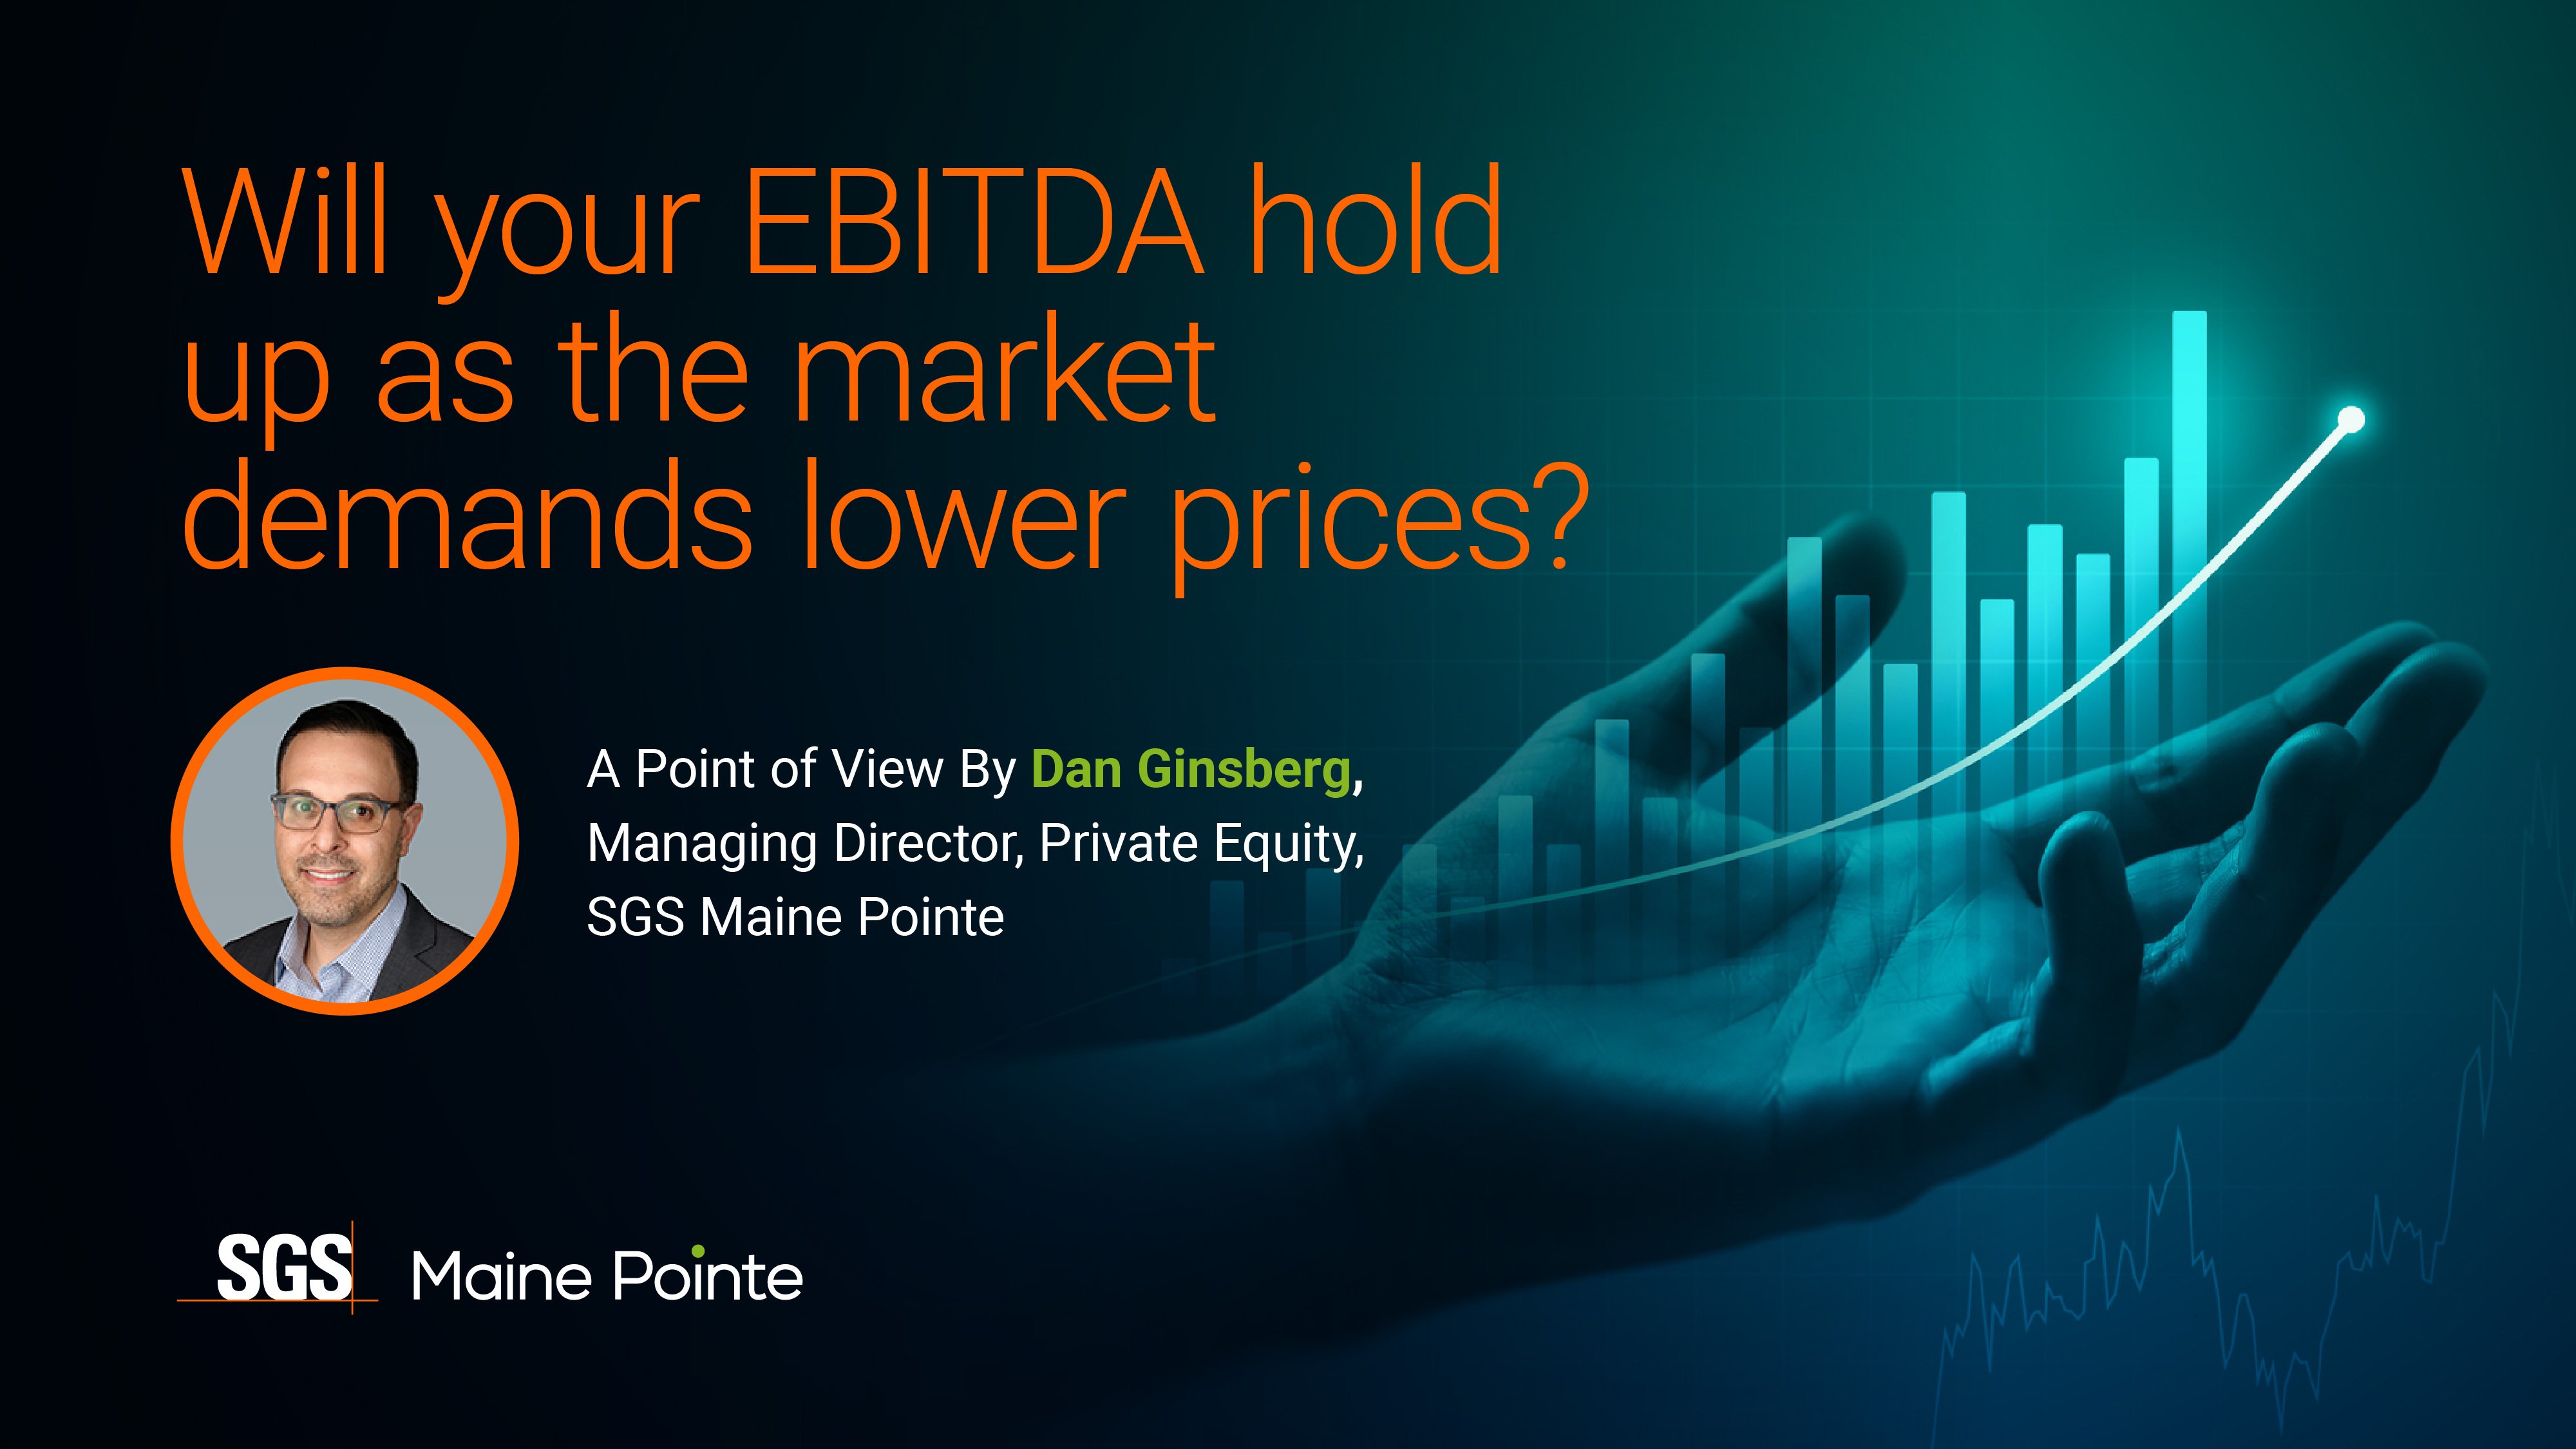 Will your EBITDA hold up as the market demands lower prices?